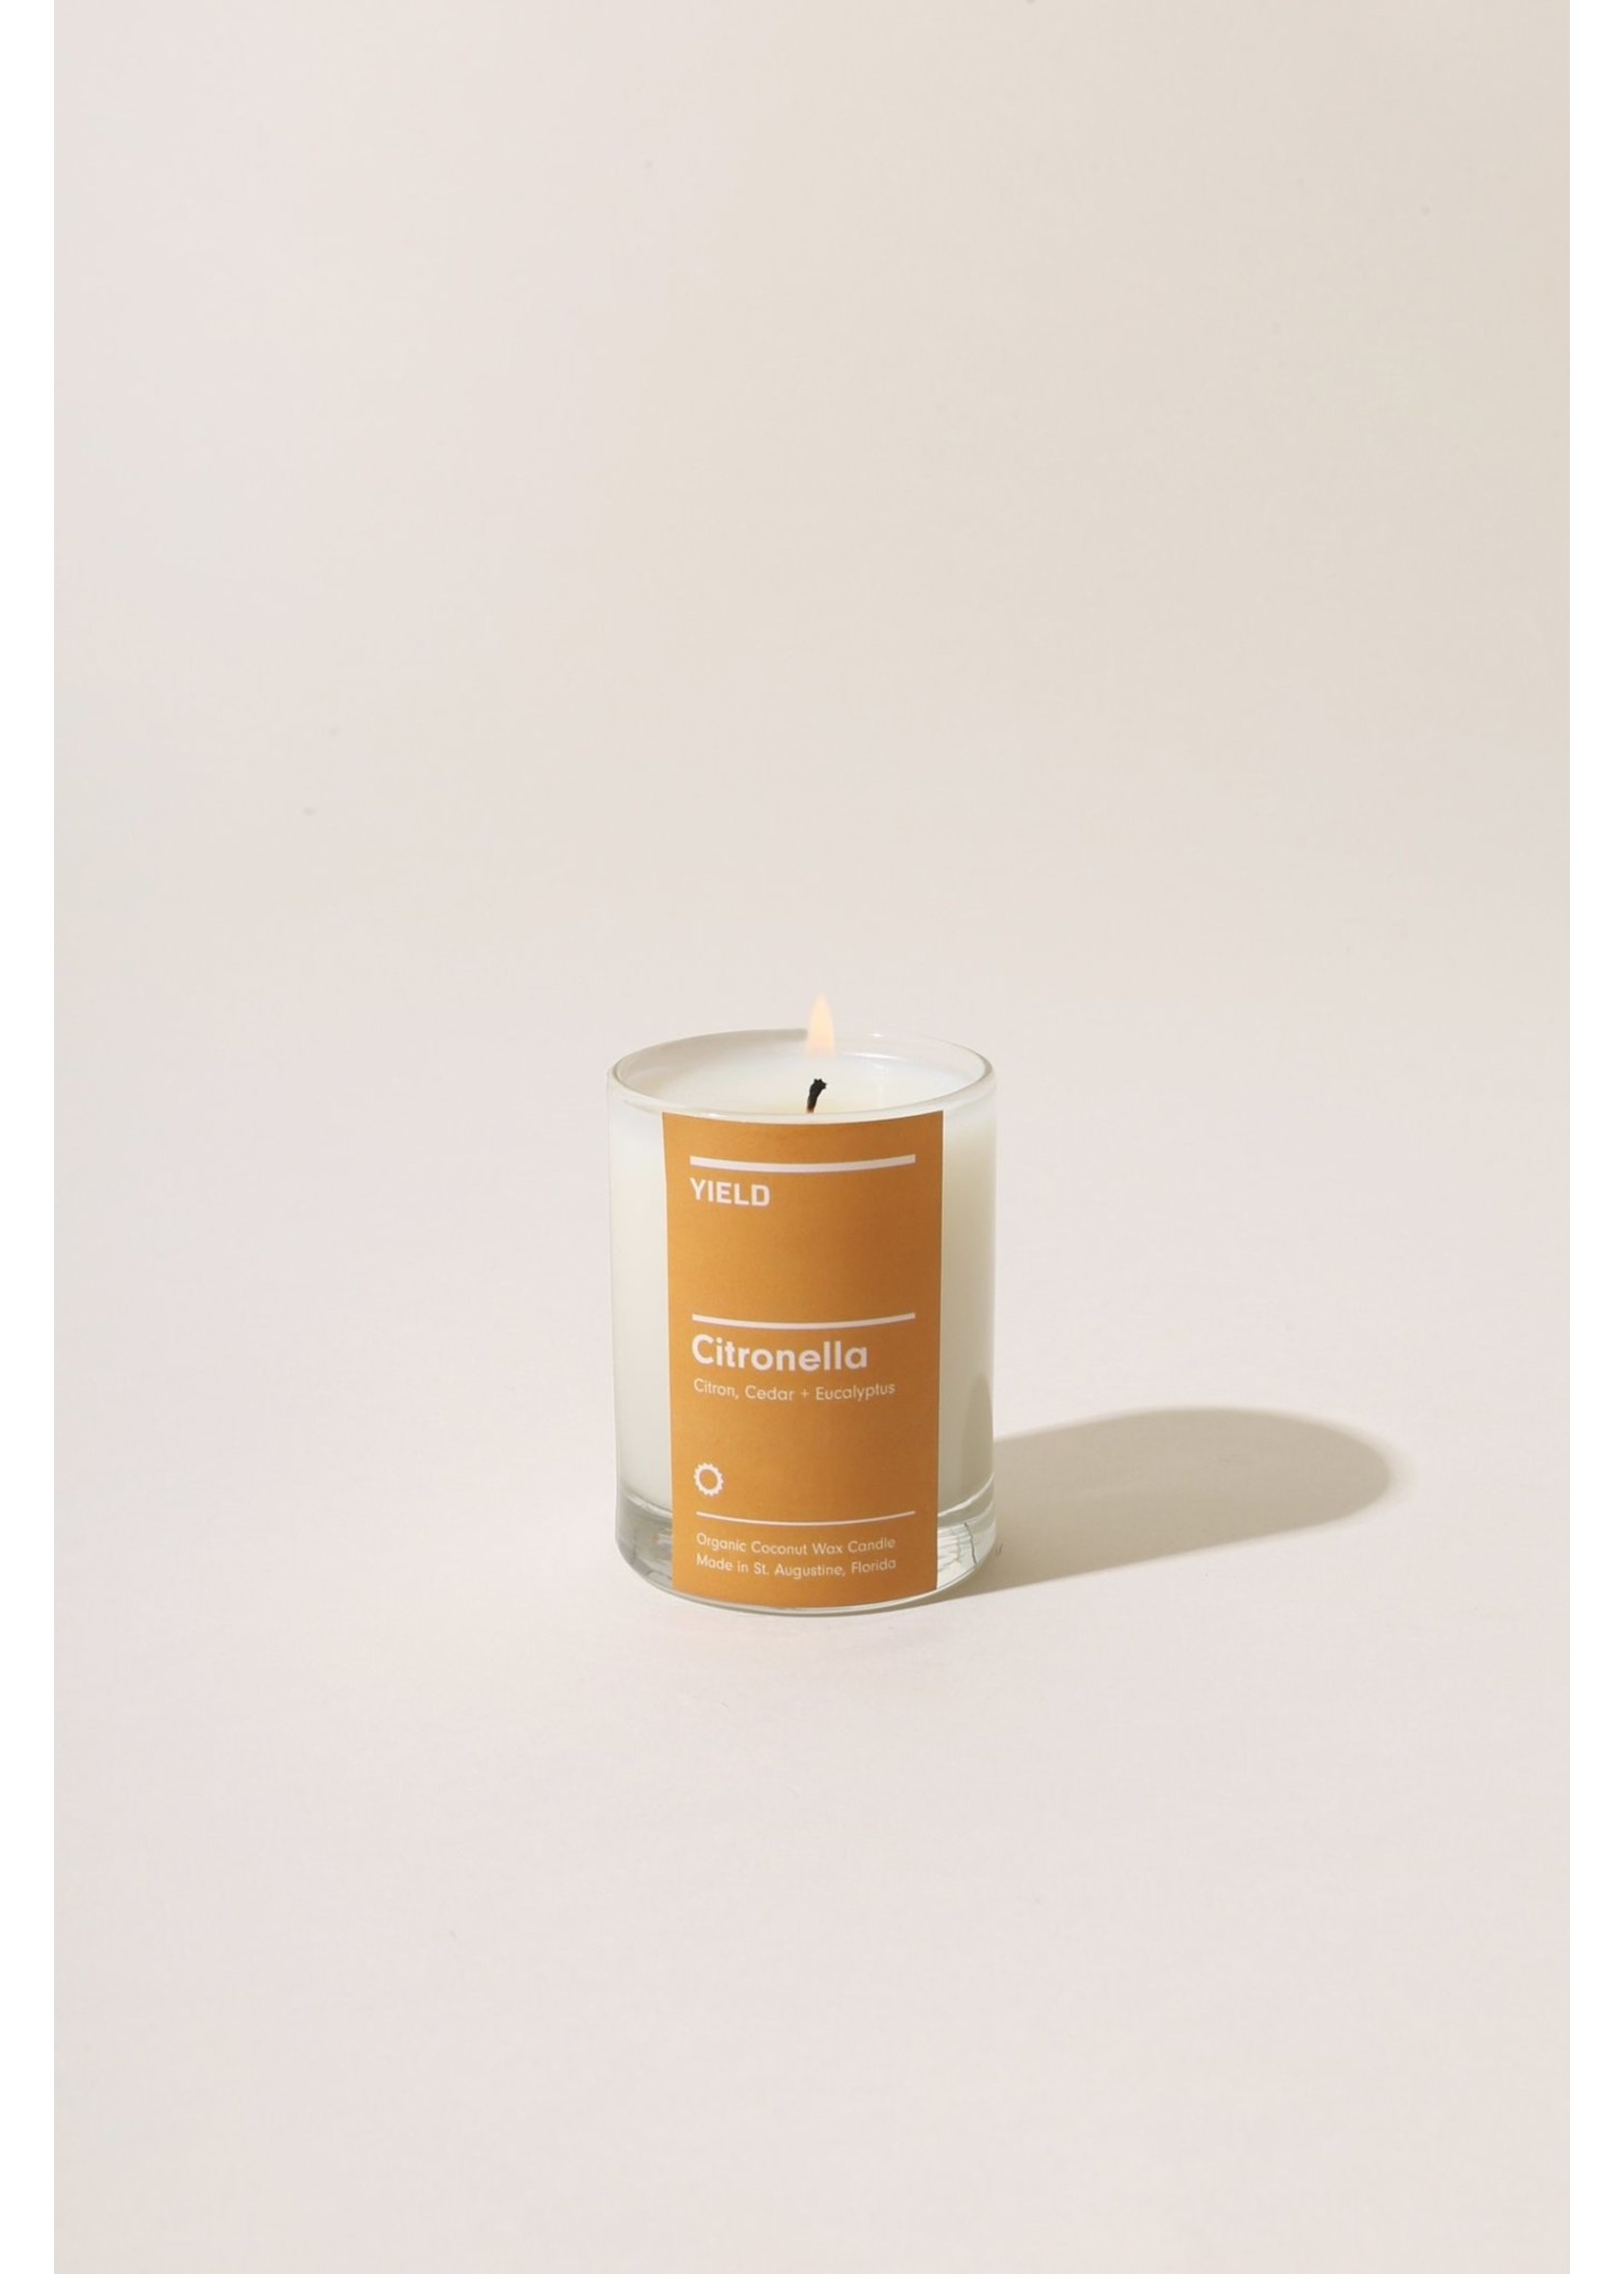 Yield Design 2.5oz Votives by Yield